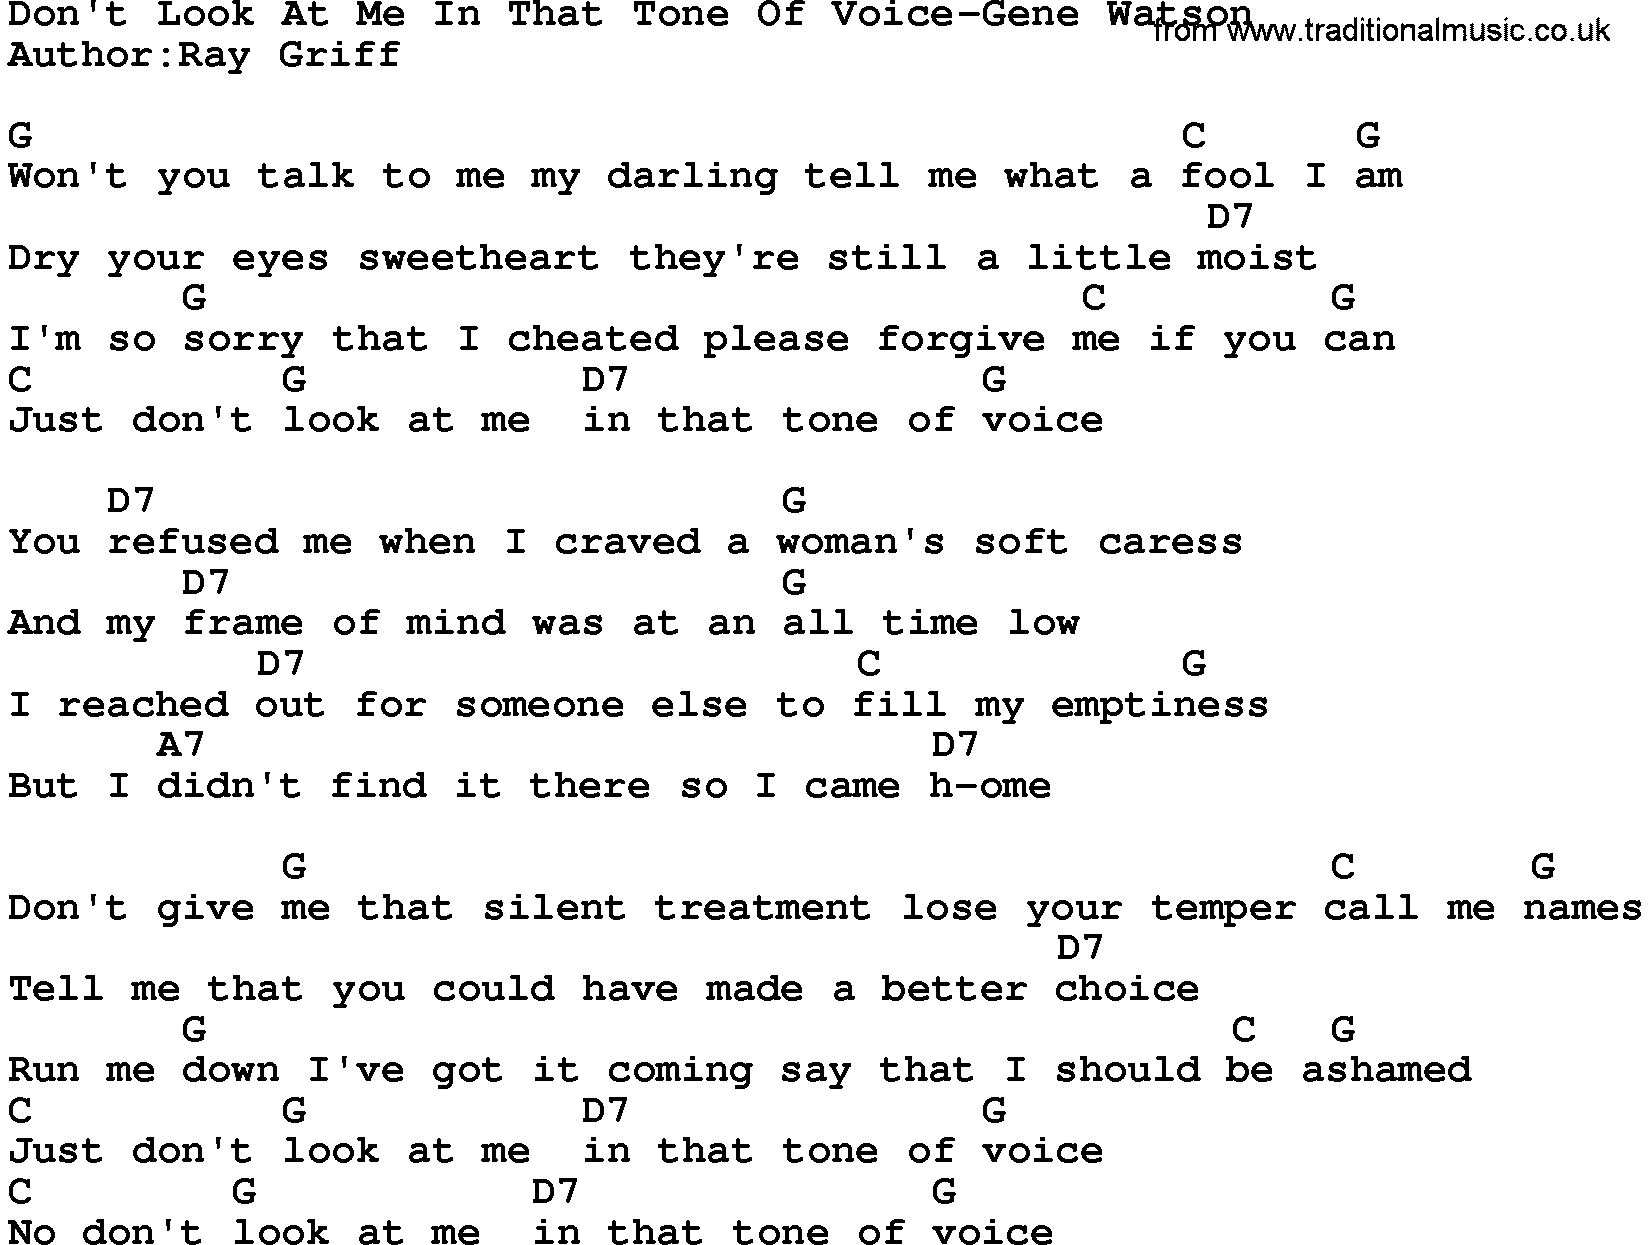 Country music song: Don't Look At Me In That Tone Of Voice-Gene Watson lyrics and chords